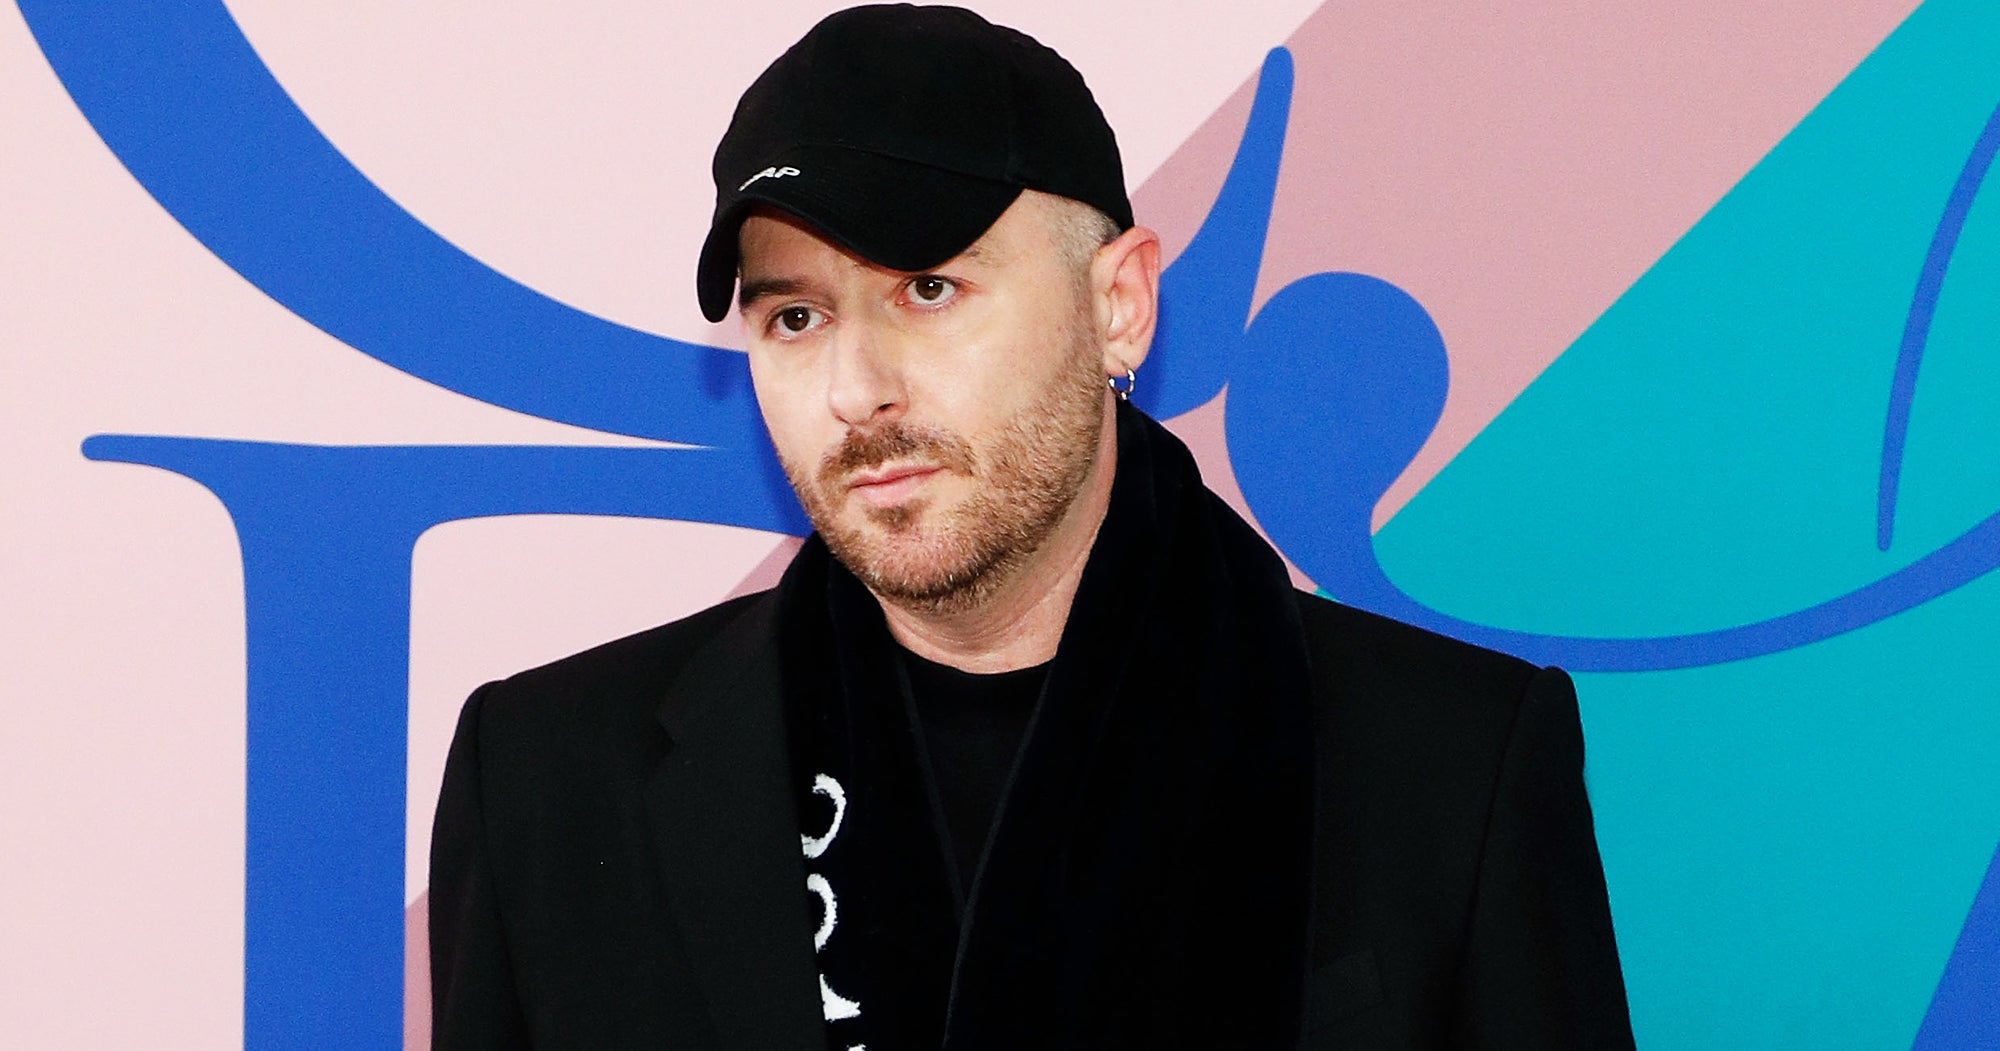 DEMNA GVASALIA - the Georgian designer who is the lead talent behind the  collective that creates the Vetements label - has been…